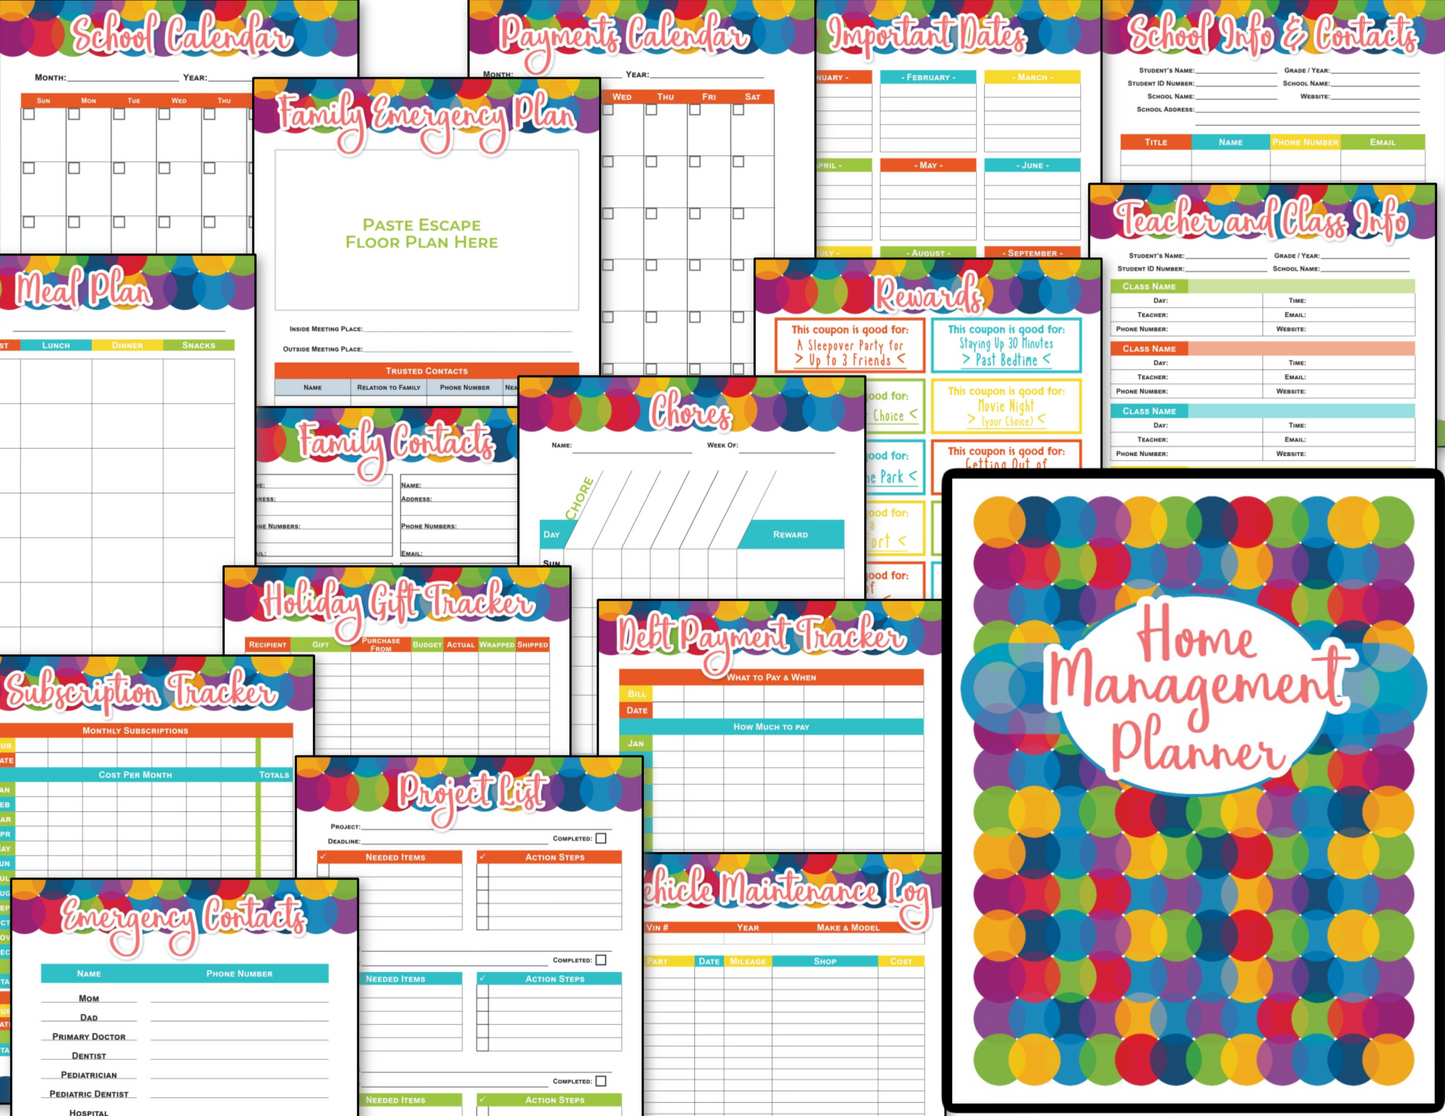 Organized 31 Shop's Home Management Planner - Colorful Circles printables.